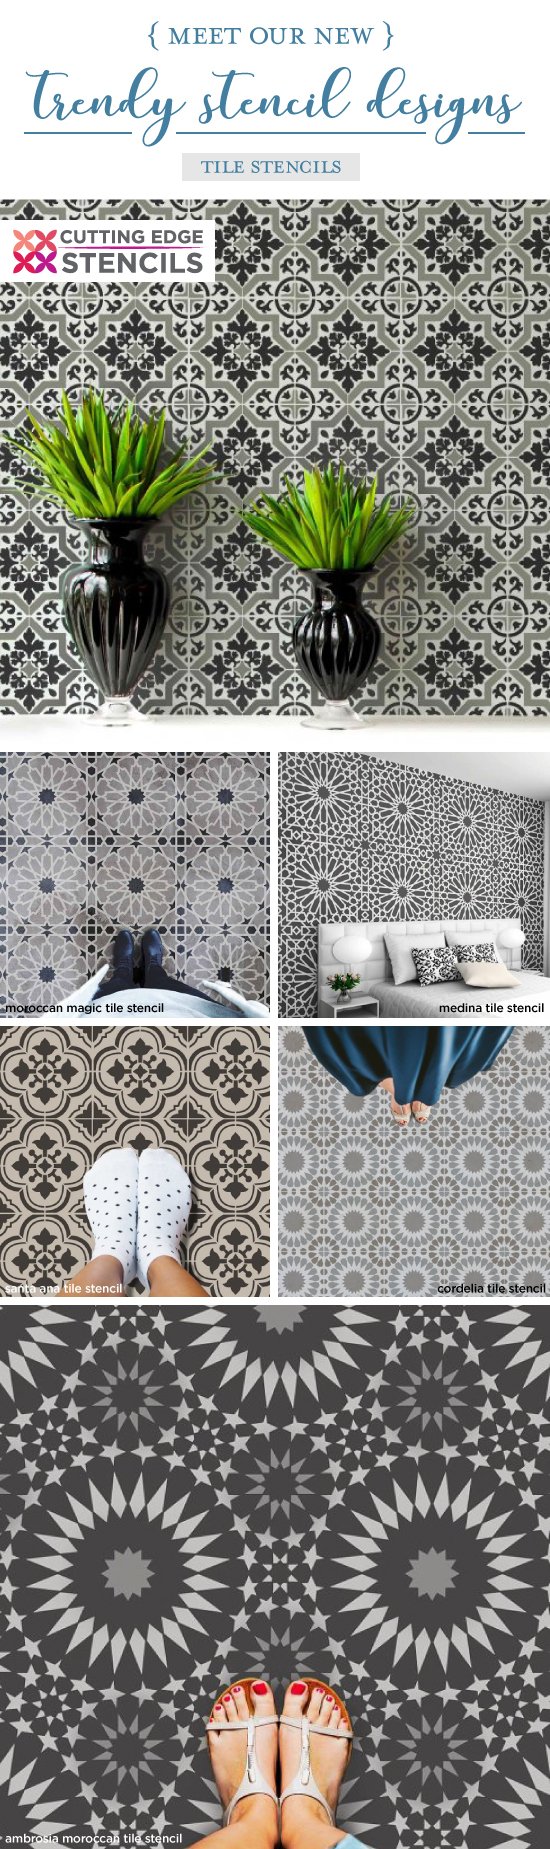 Cutting Edge Stencils shares a New wall stencil collection that includes gorgeous cement tile patterns perfect for making over old floors or linoleum flooring. http://www.cuttingedgestencils.com/wall-stencils-stencil-designs.html